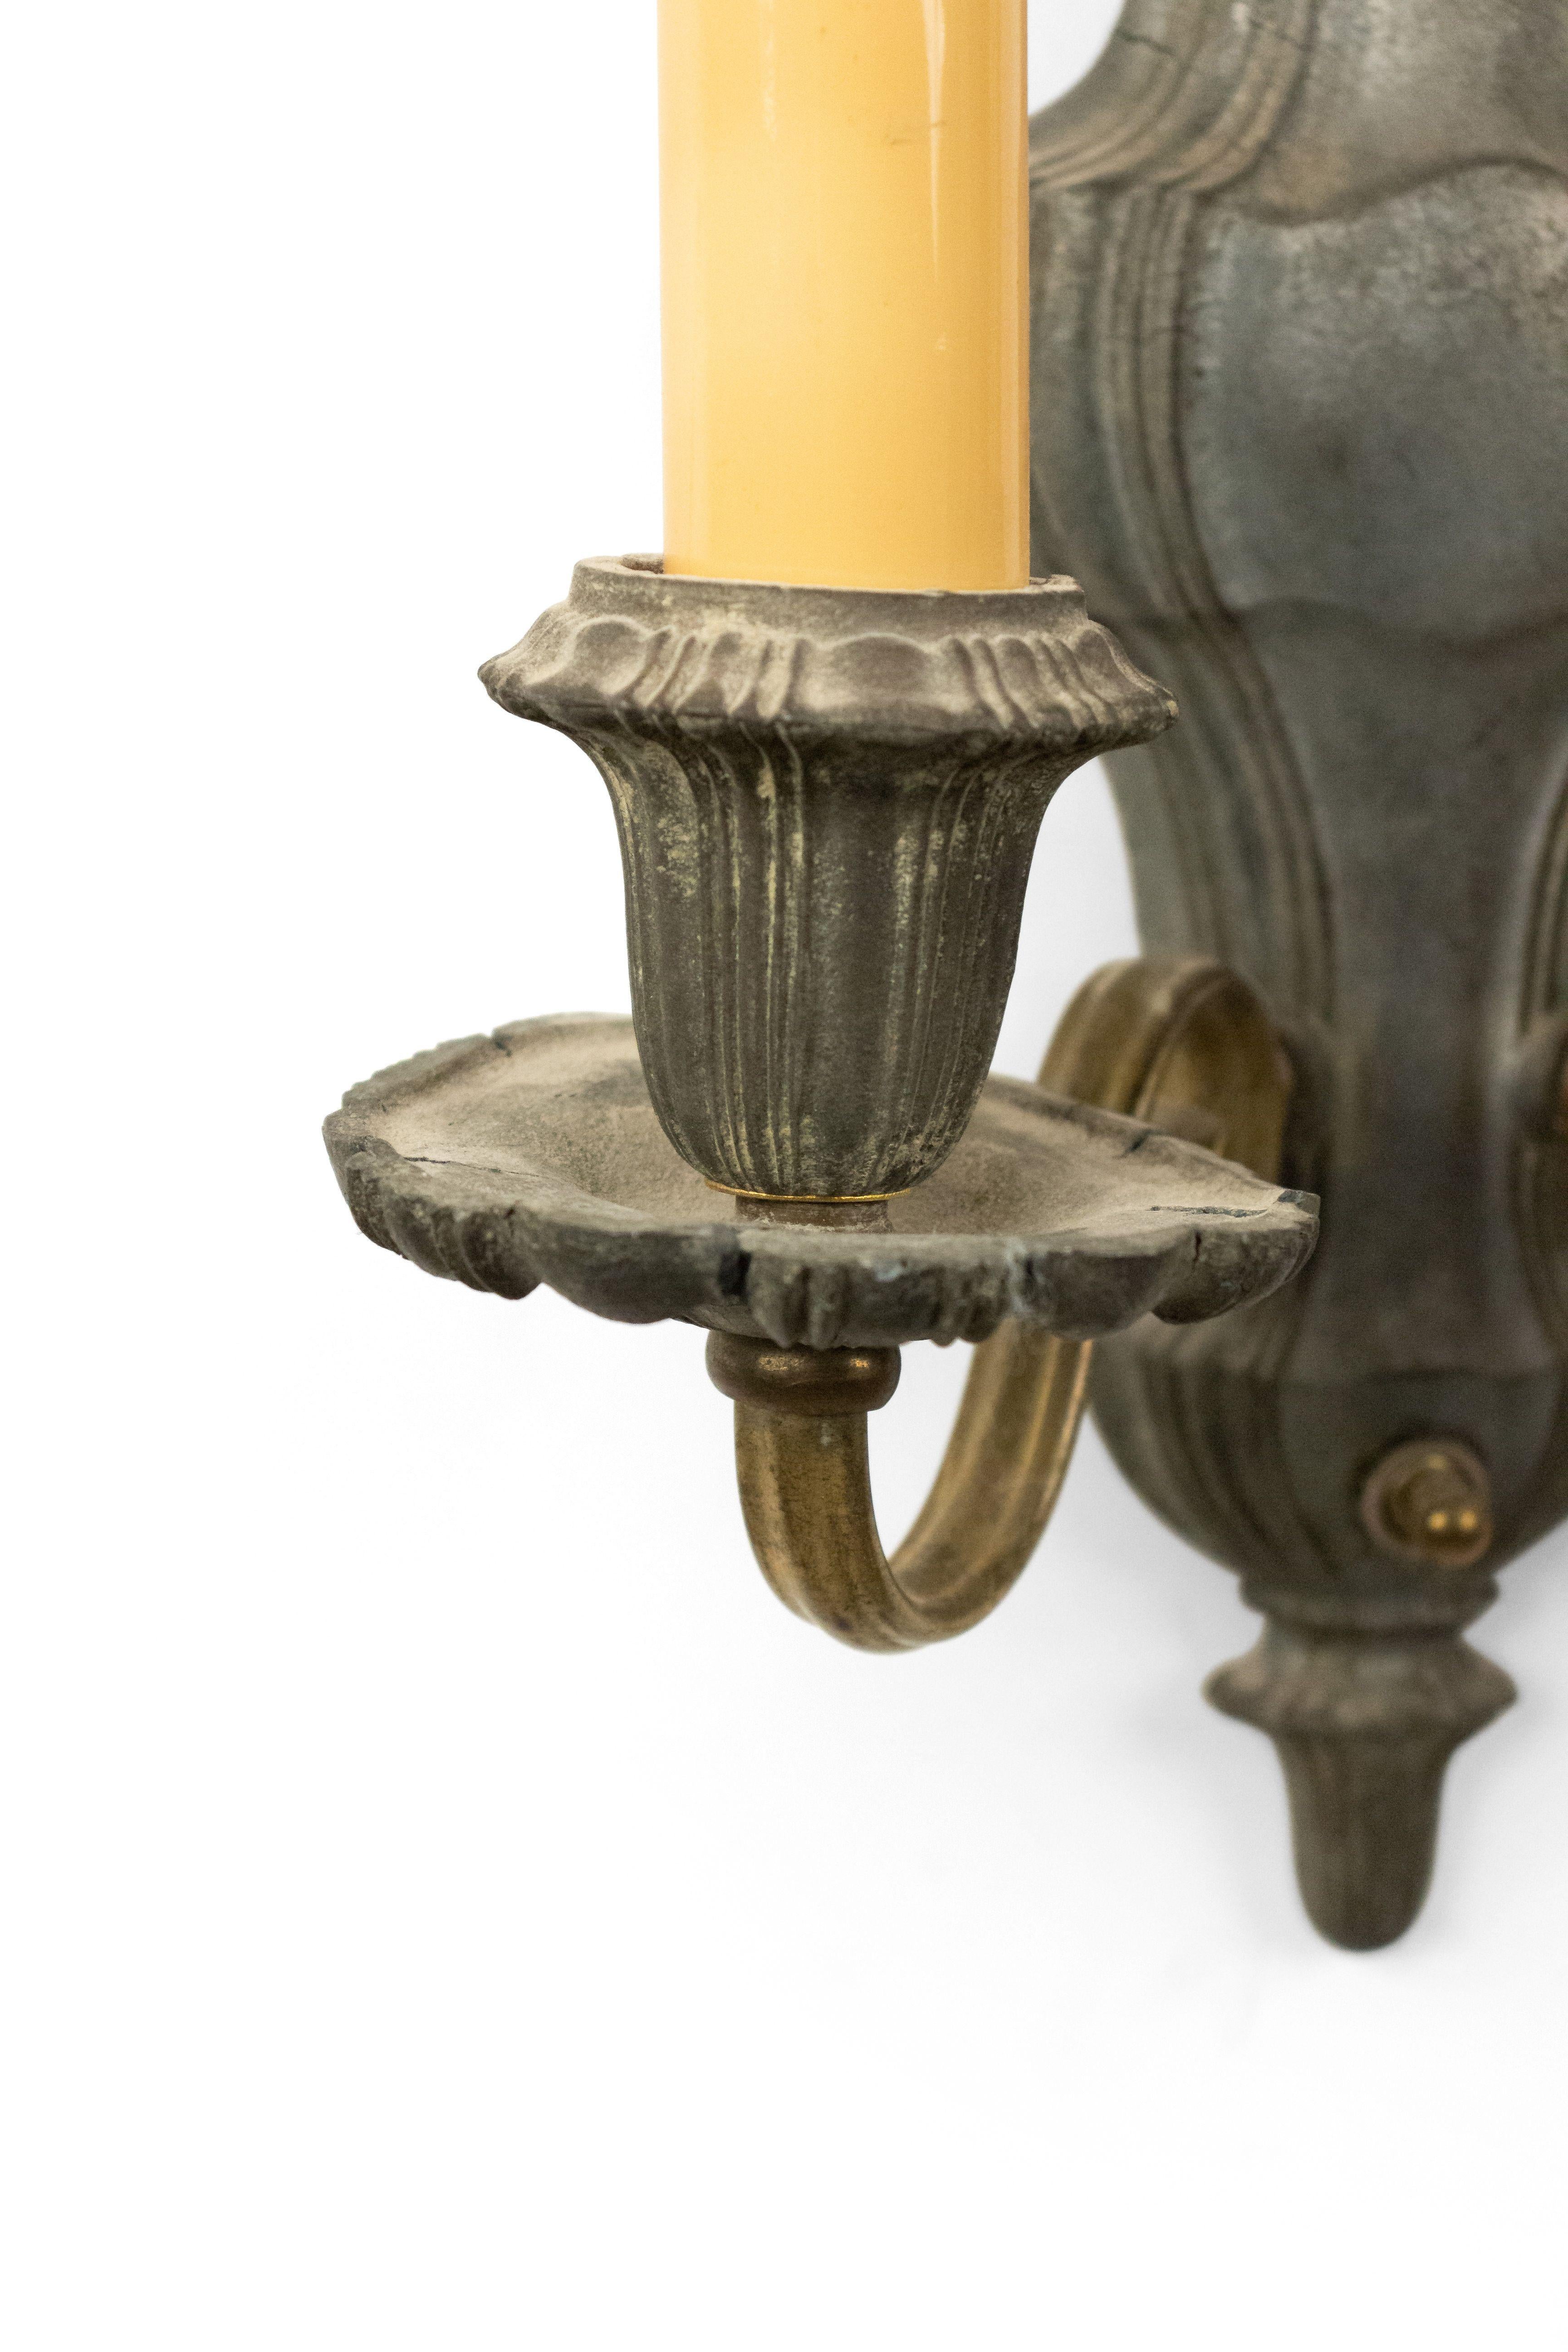 3 English Georgian-style (20th Century) pewter and brass wall sconces with two arms and fluted vasiform backplates (PRICED EACH)
